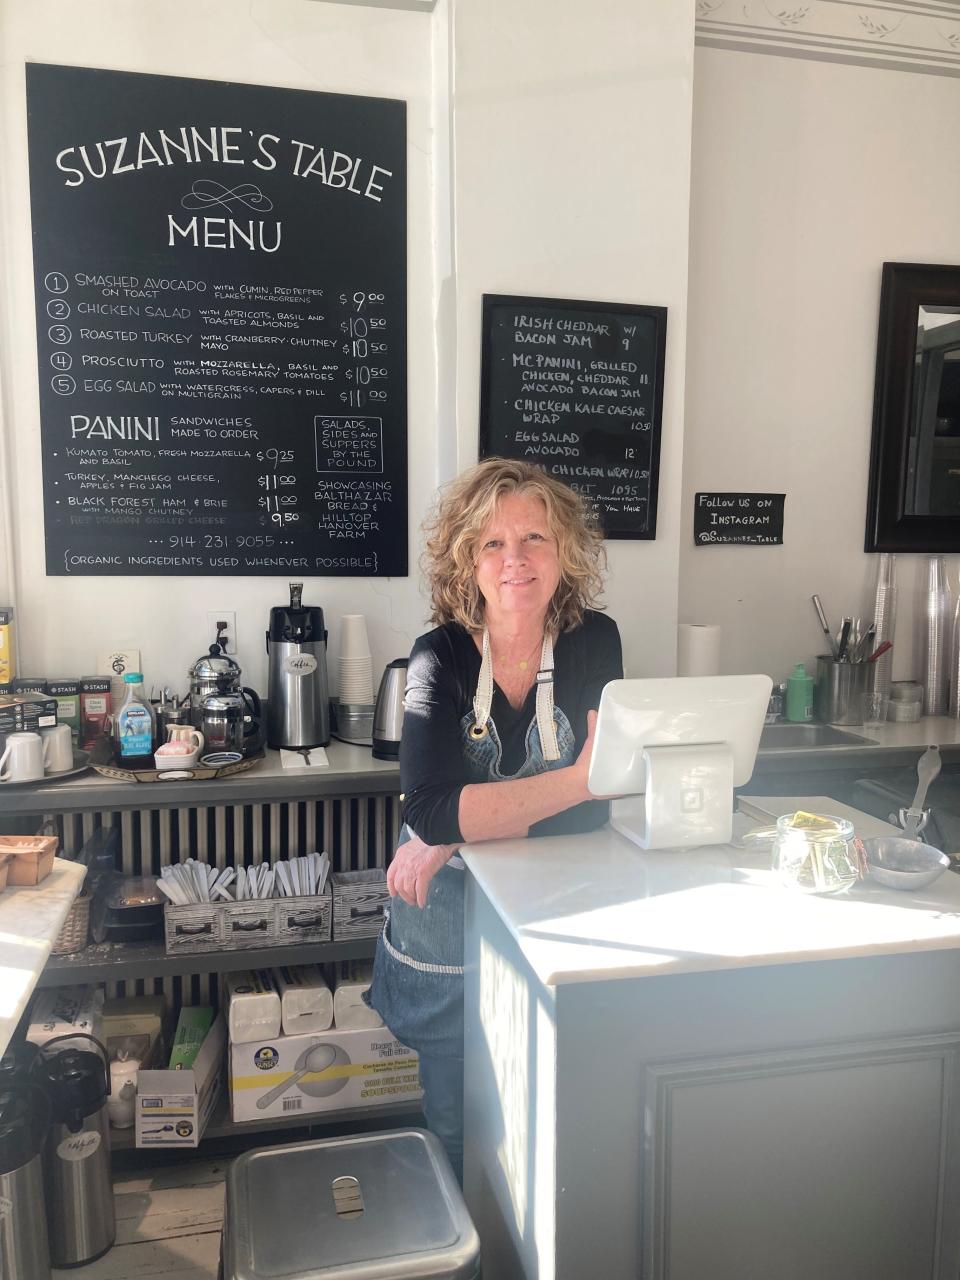 Suzanne Hart, owner of Suzanne's Table in Irvington, needs to move out of her space by March 1.